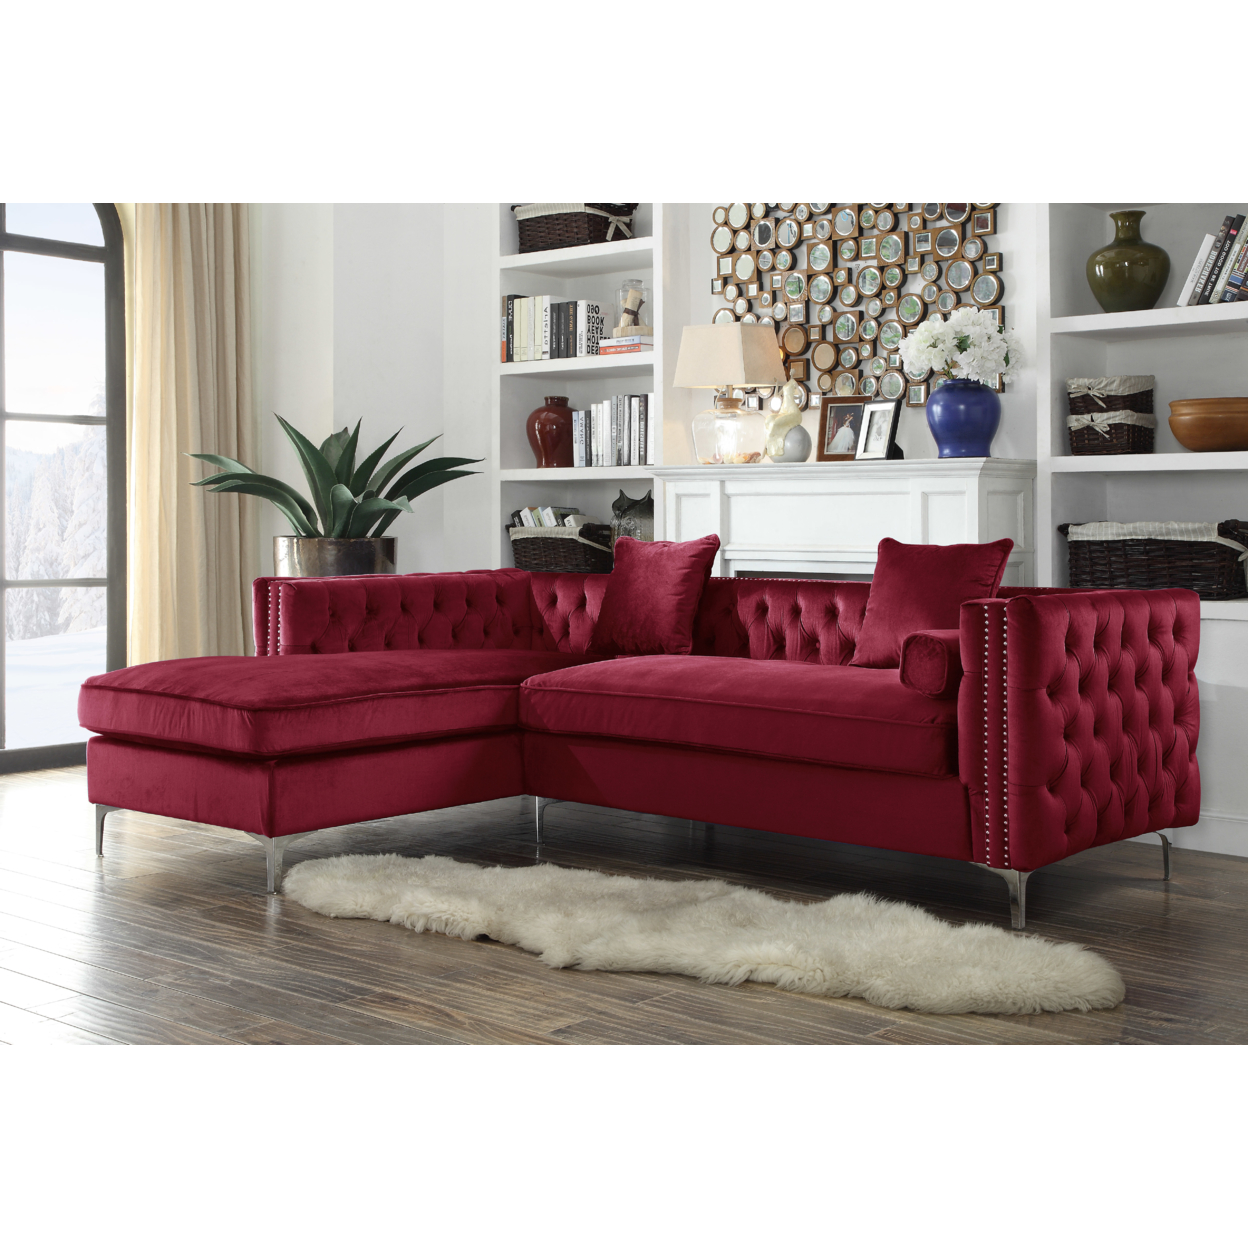 Picasso Velvet Left Facing Sectional Sofa Button Tufted With Silver Nailhead Trim Silvertone Metal Y-leg - Red